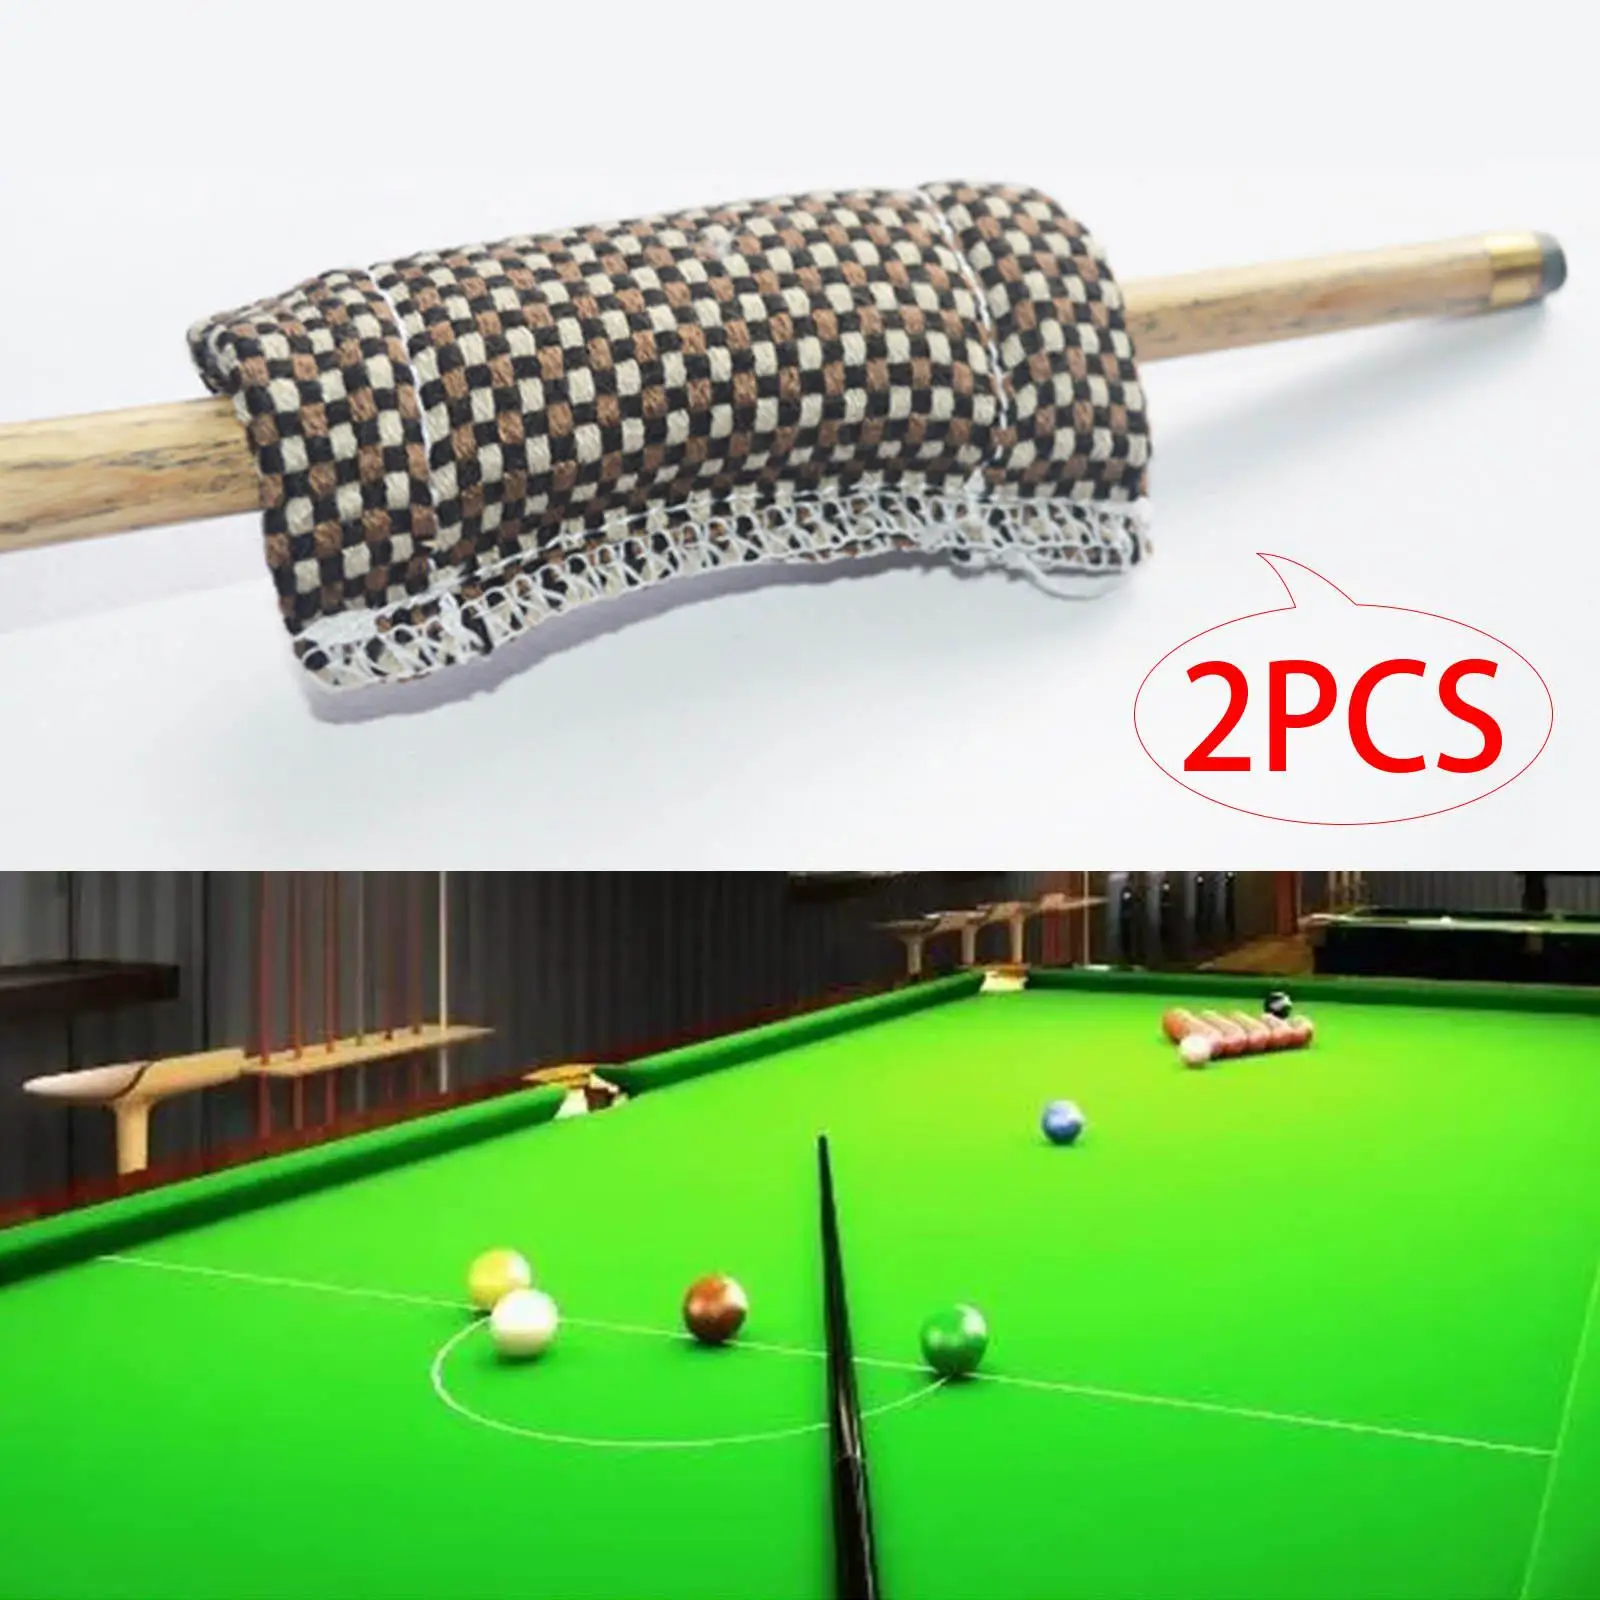 2Pcs Billiards Snooker Pool  Cleaning Cloth Shaft Polisher Burnisher Soft Convenient Cloth Towel Pool Table Accessories